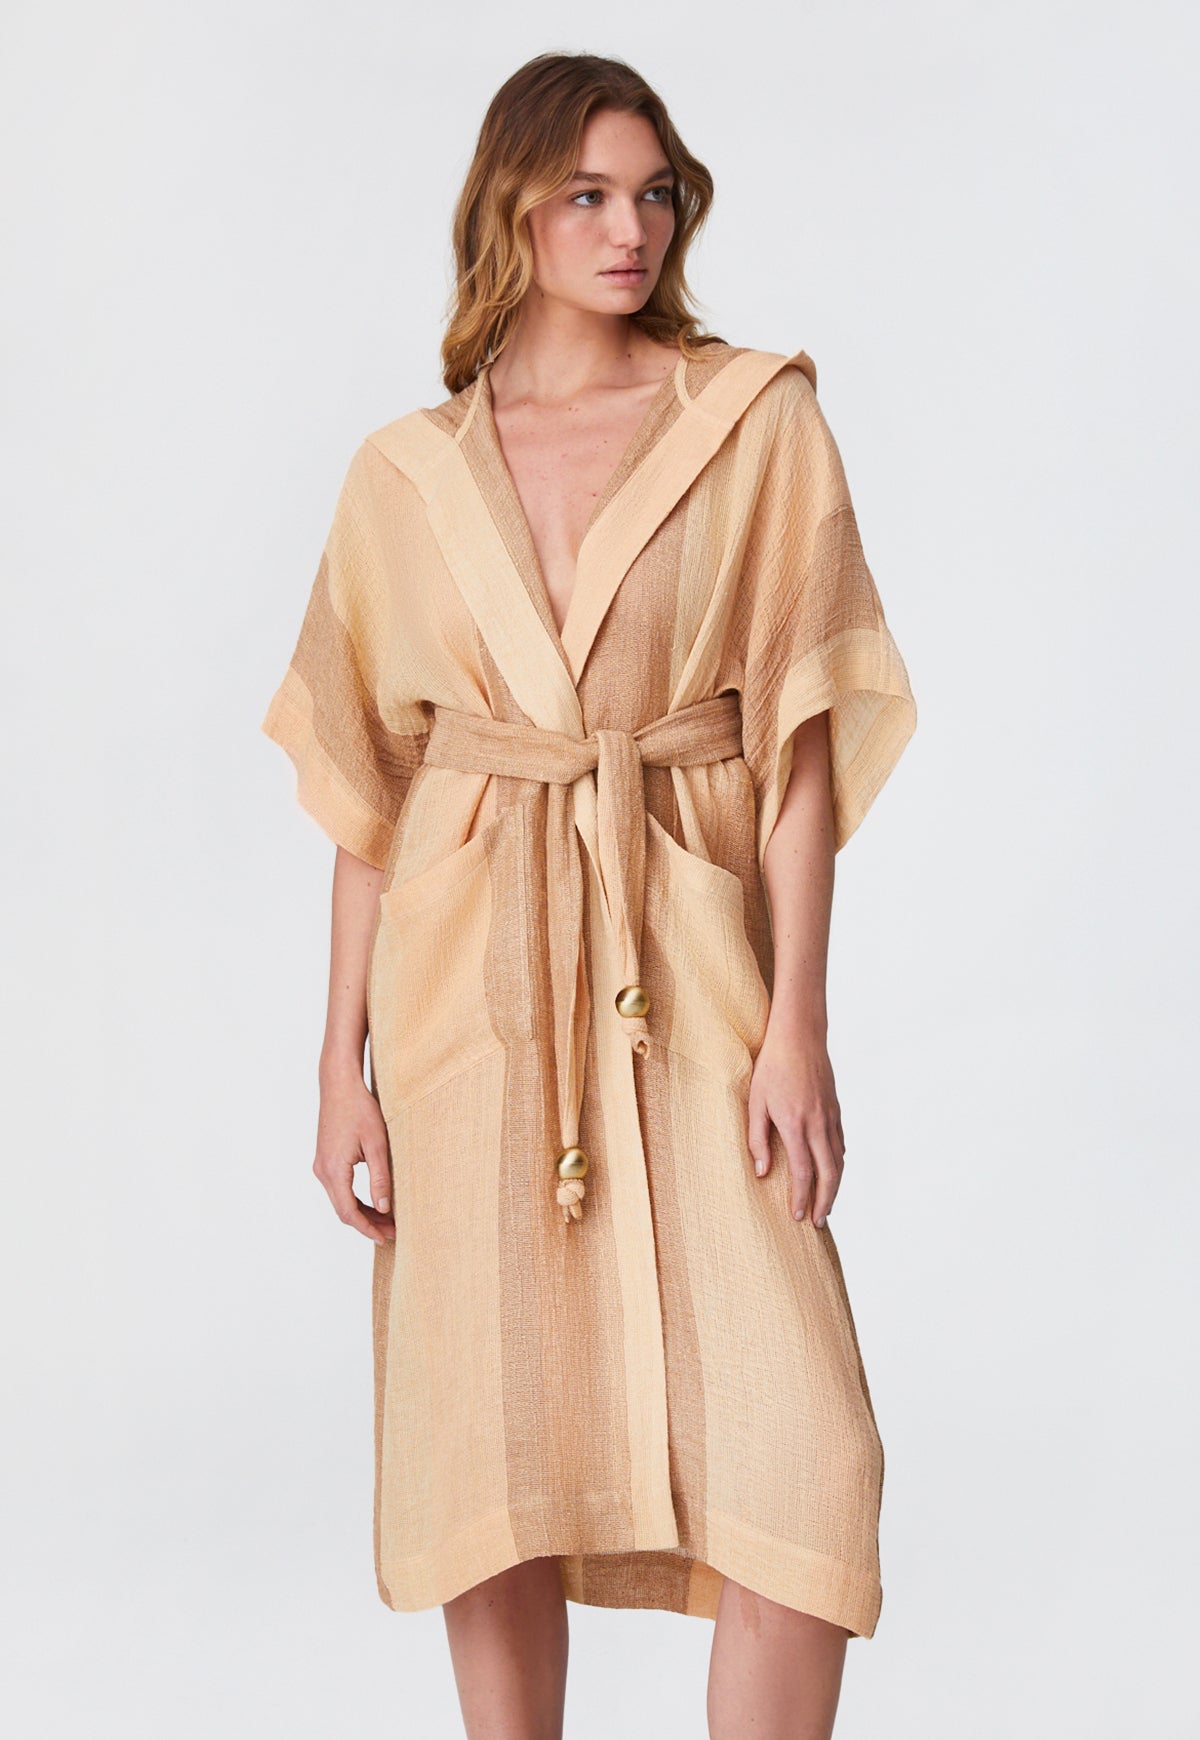 THE DRESSING GOWN in DESERT AWNING STRIPED GAUZE